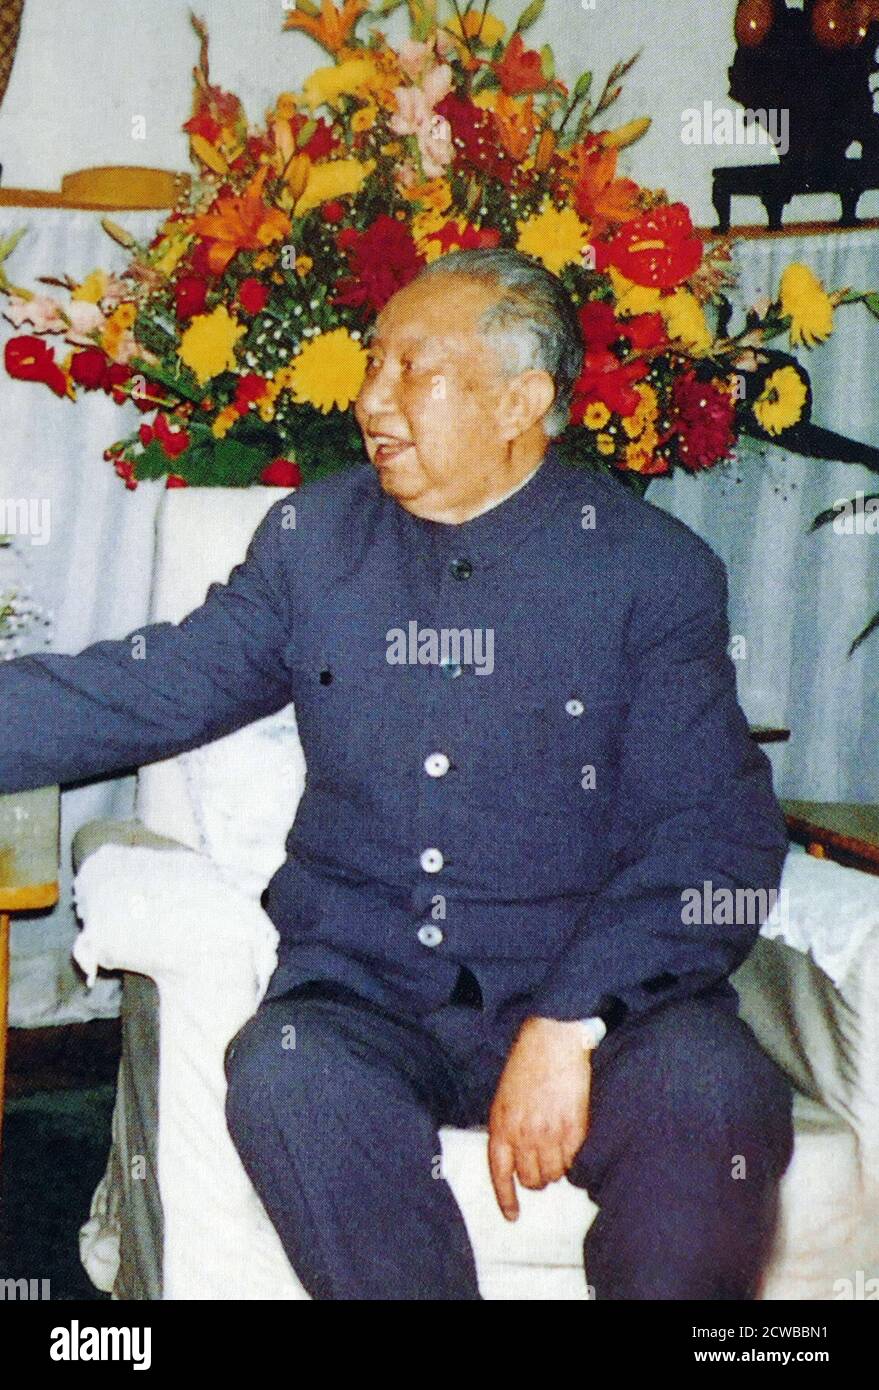 Hua Guofeng (1921 - 2008) Chinese politician who served as Chairman of the Communist Party of China and Premier of the People's Republic of China. Hua held the top offices of the government, party, and the military after Premier Zhou and Chairman Mao's death Stock Photo